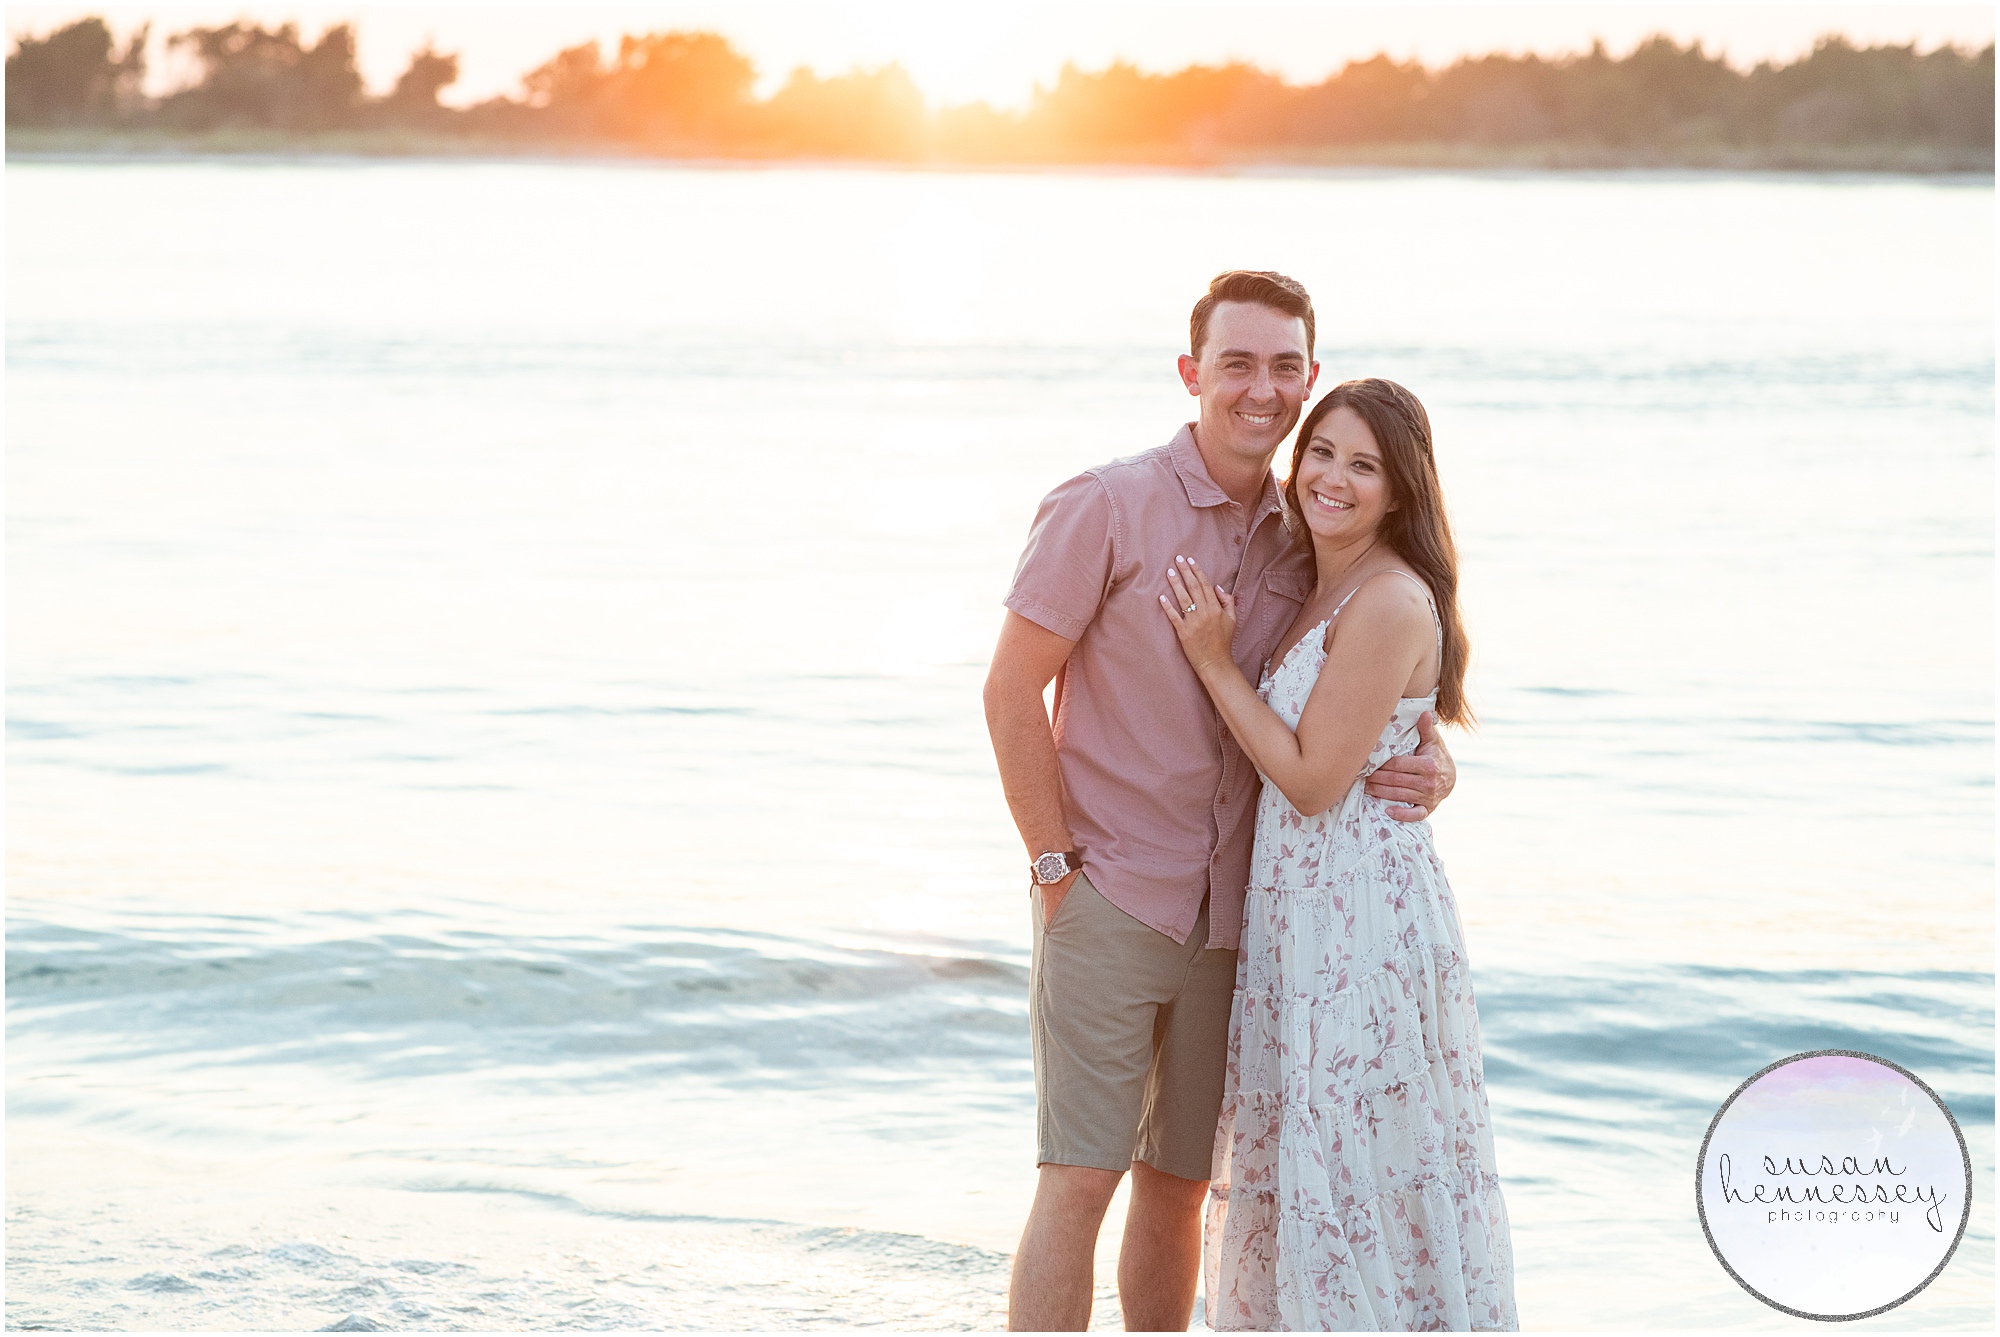 Golden hour sunset photography at Corson's Inlet Engagement Session